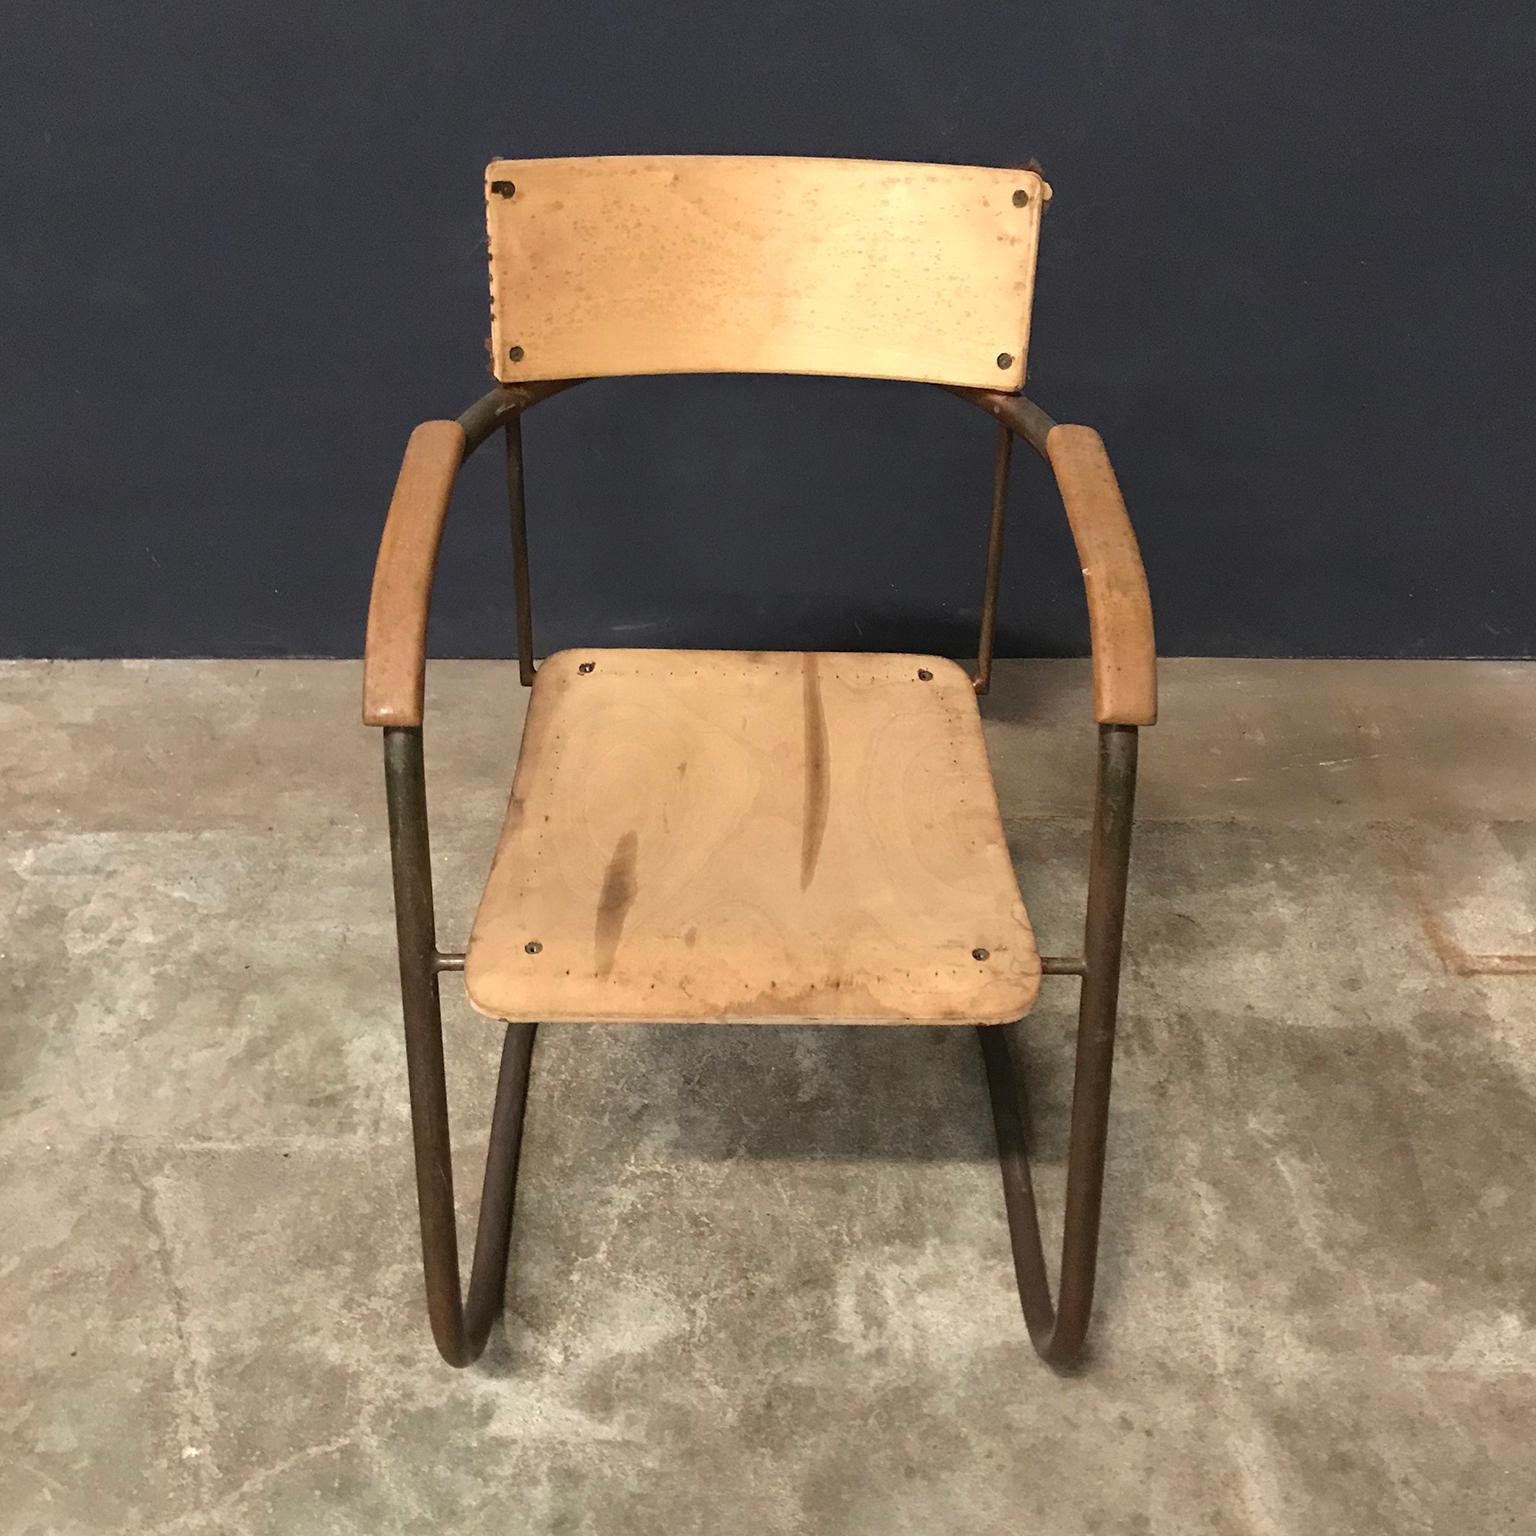 Paul Schuitema Tube Chair, Original in Copper and Upholstered Wood, circa 1930 For Sale 1